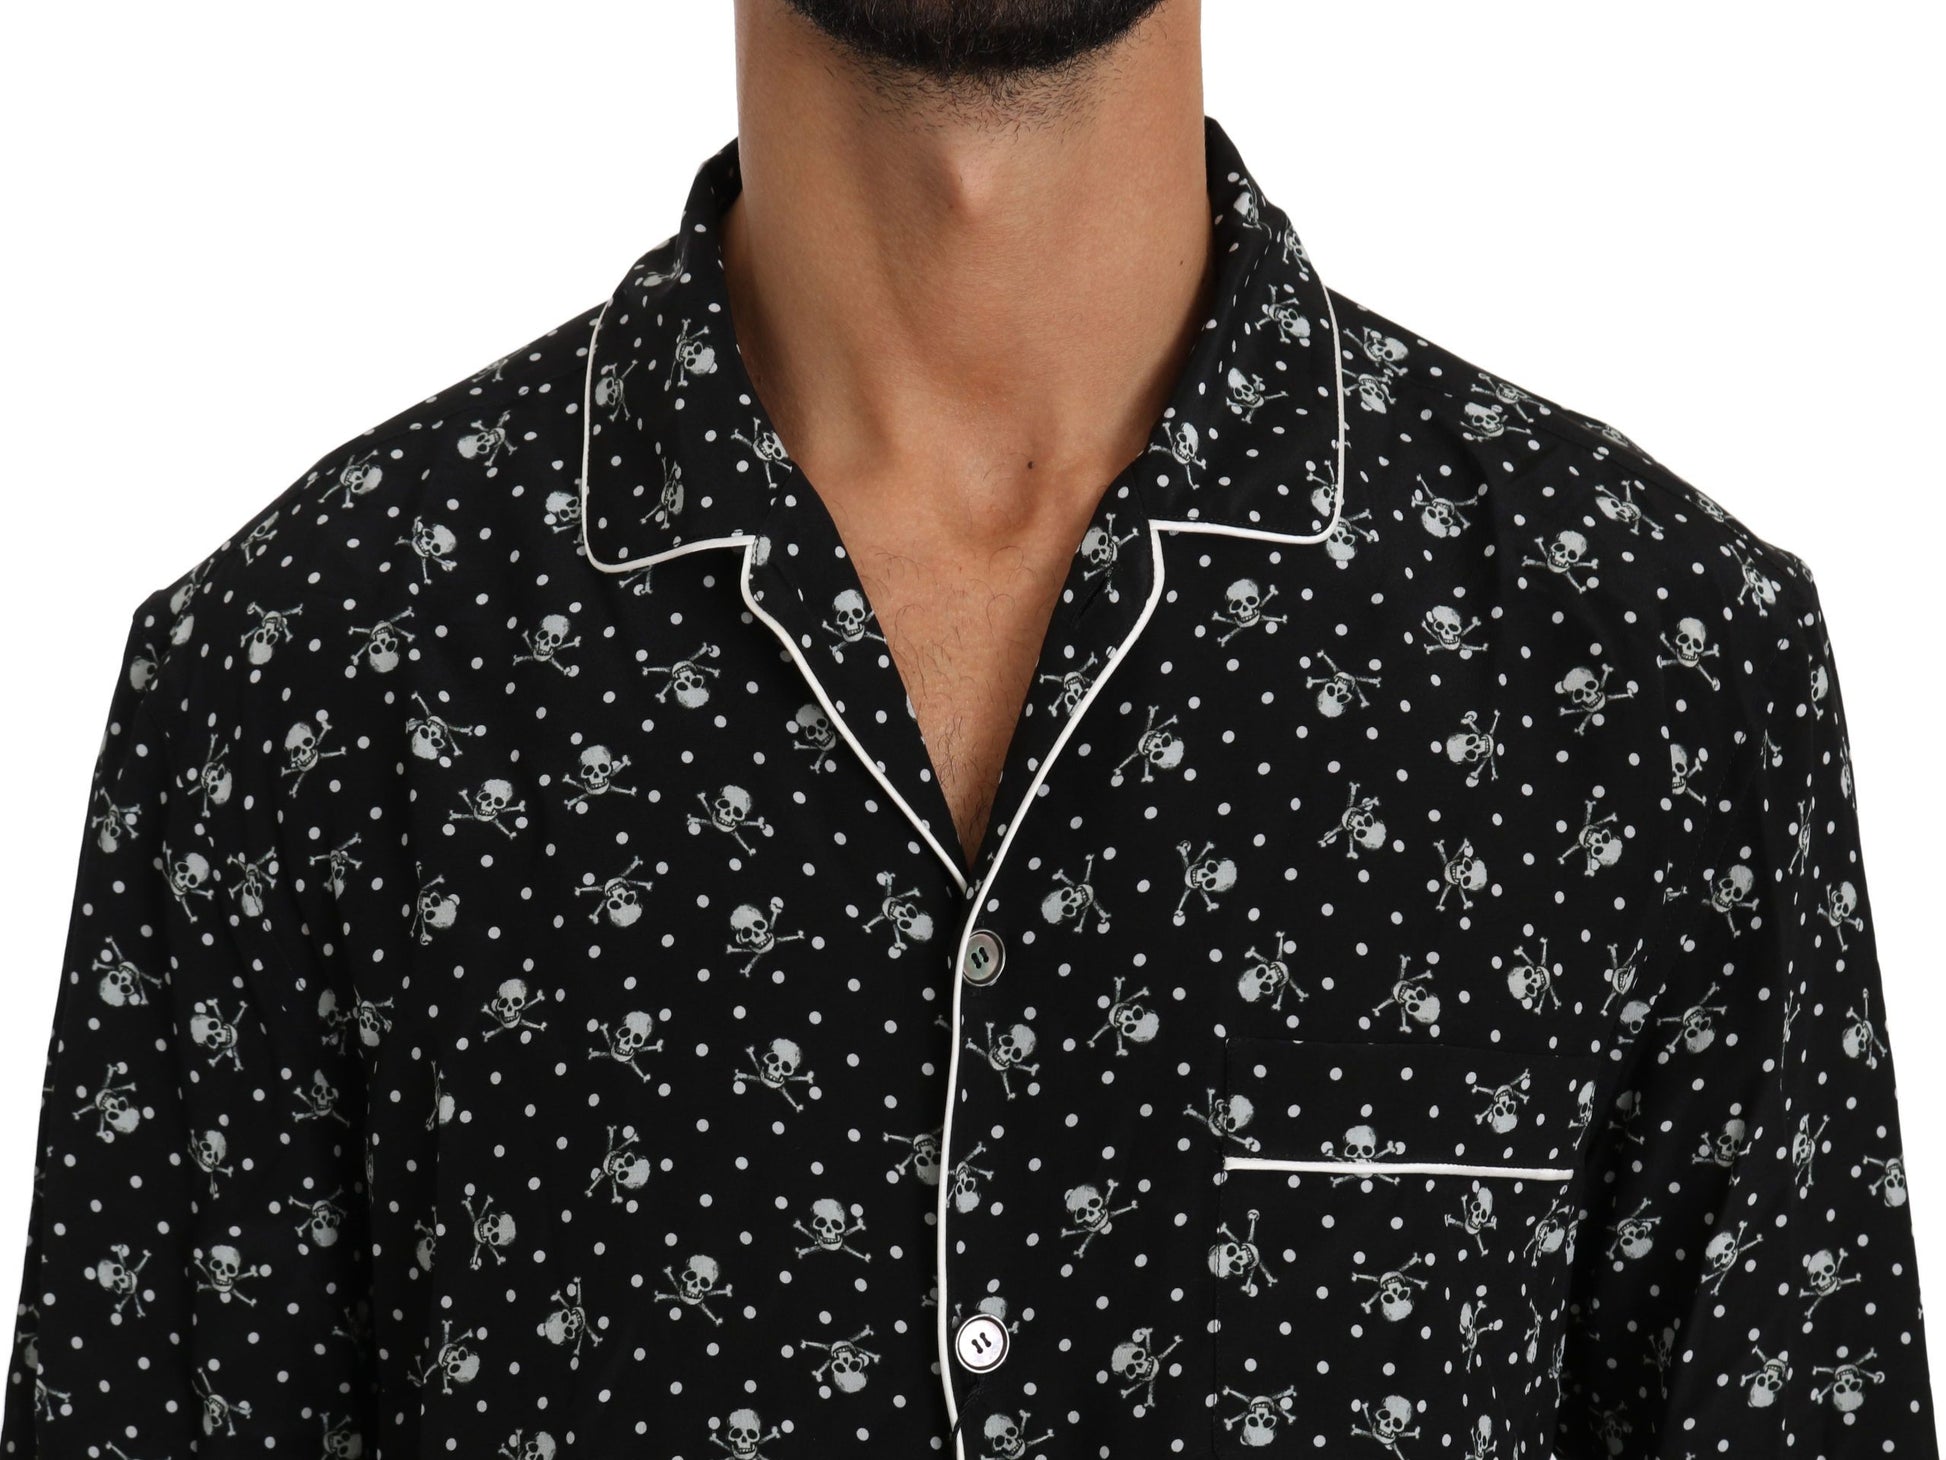 Black Skull Print Silk Sleepwear Shirt - Designed by Dolce & Gabbana Available to Buy at a Discounted Price on Moon Behind The Hill Online Designer Discount Store